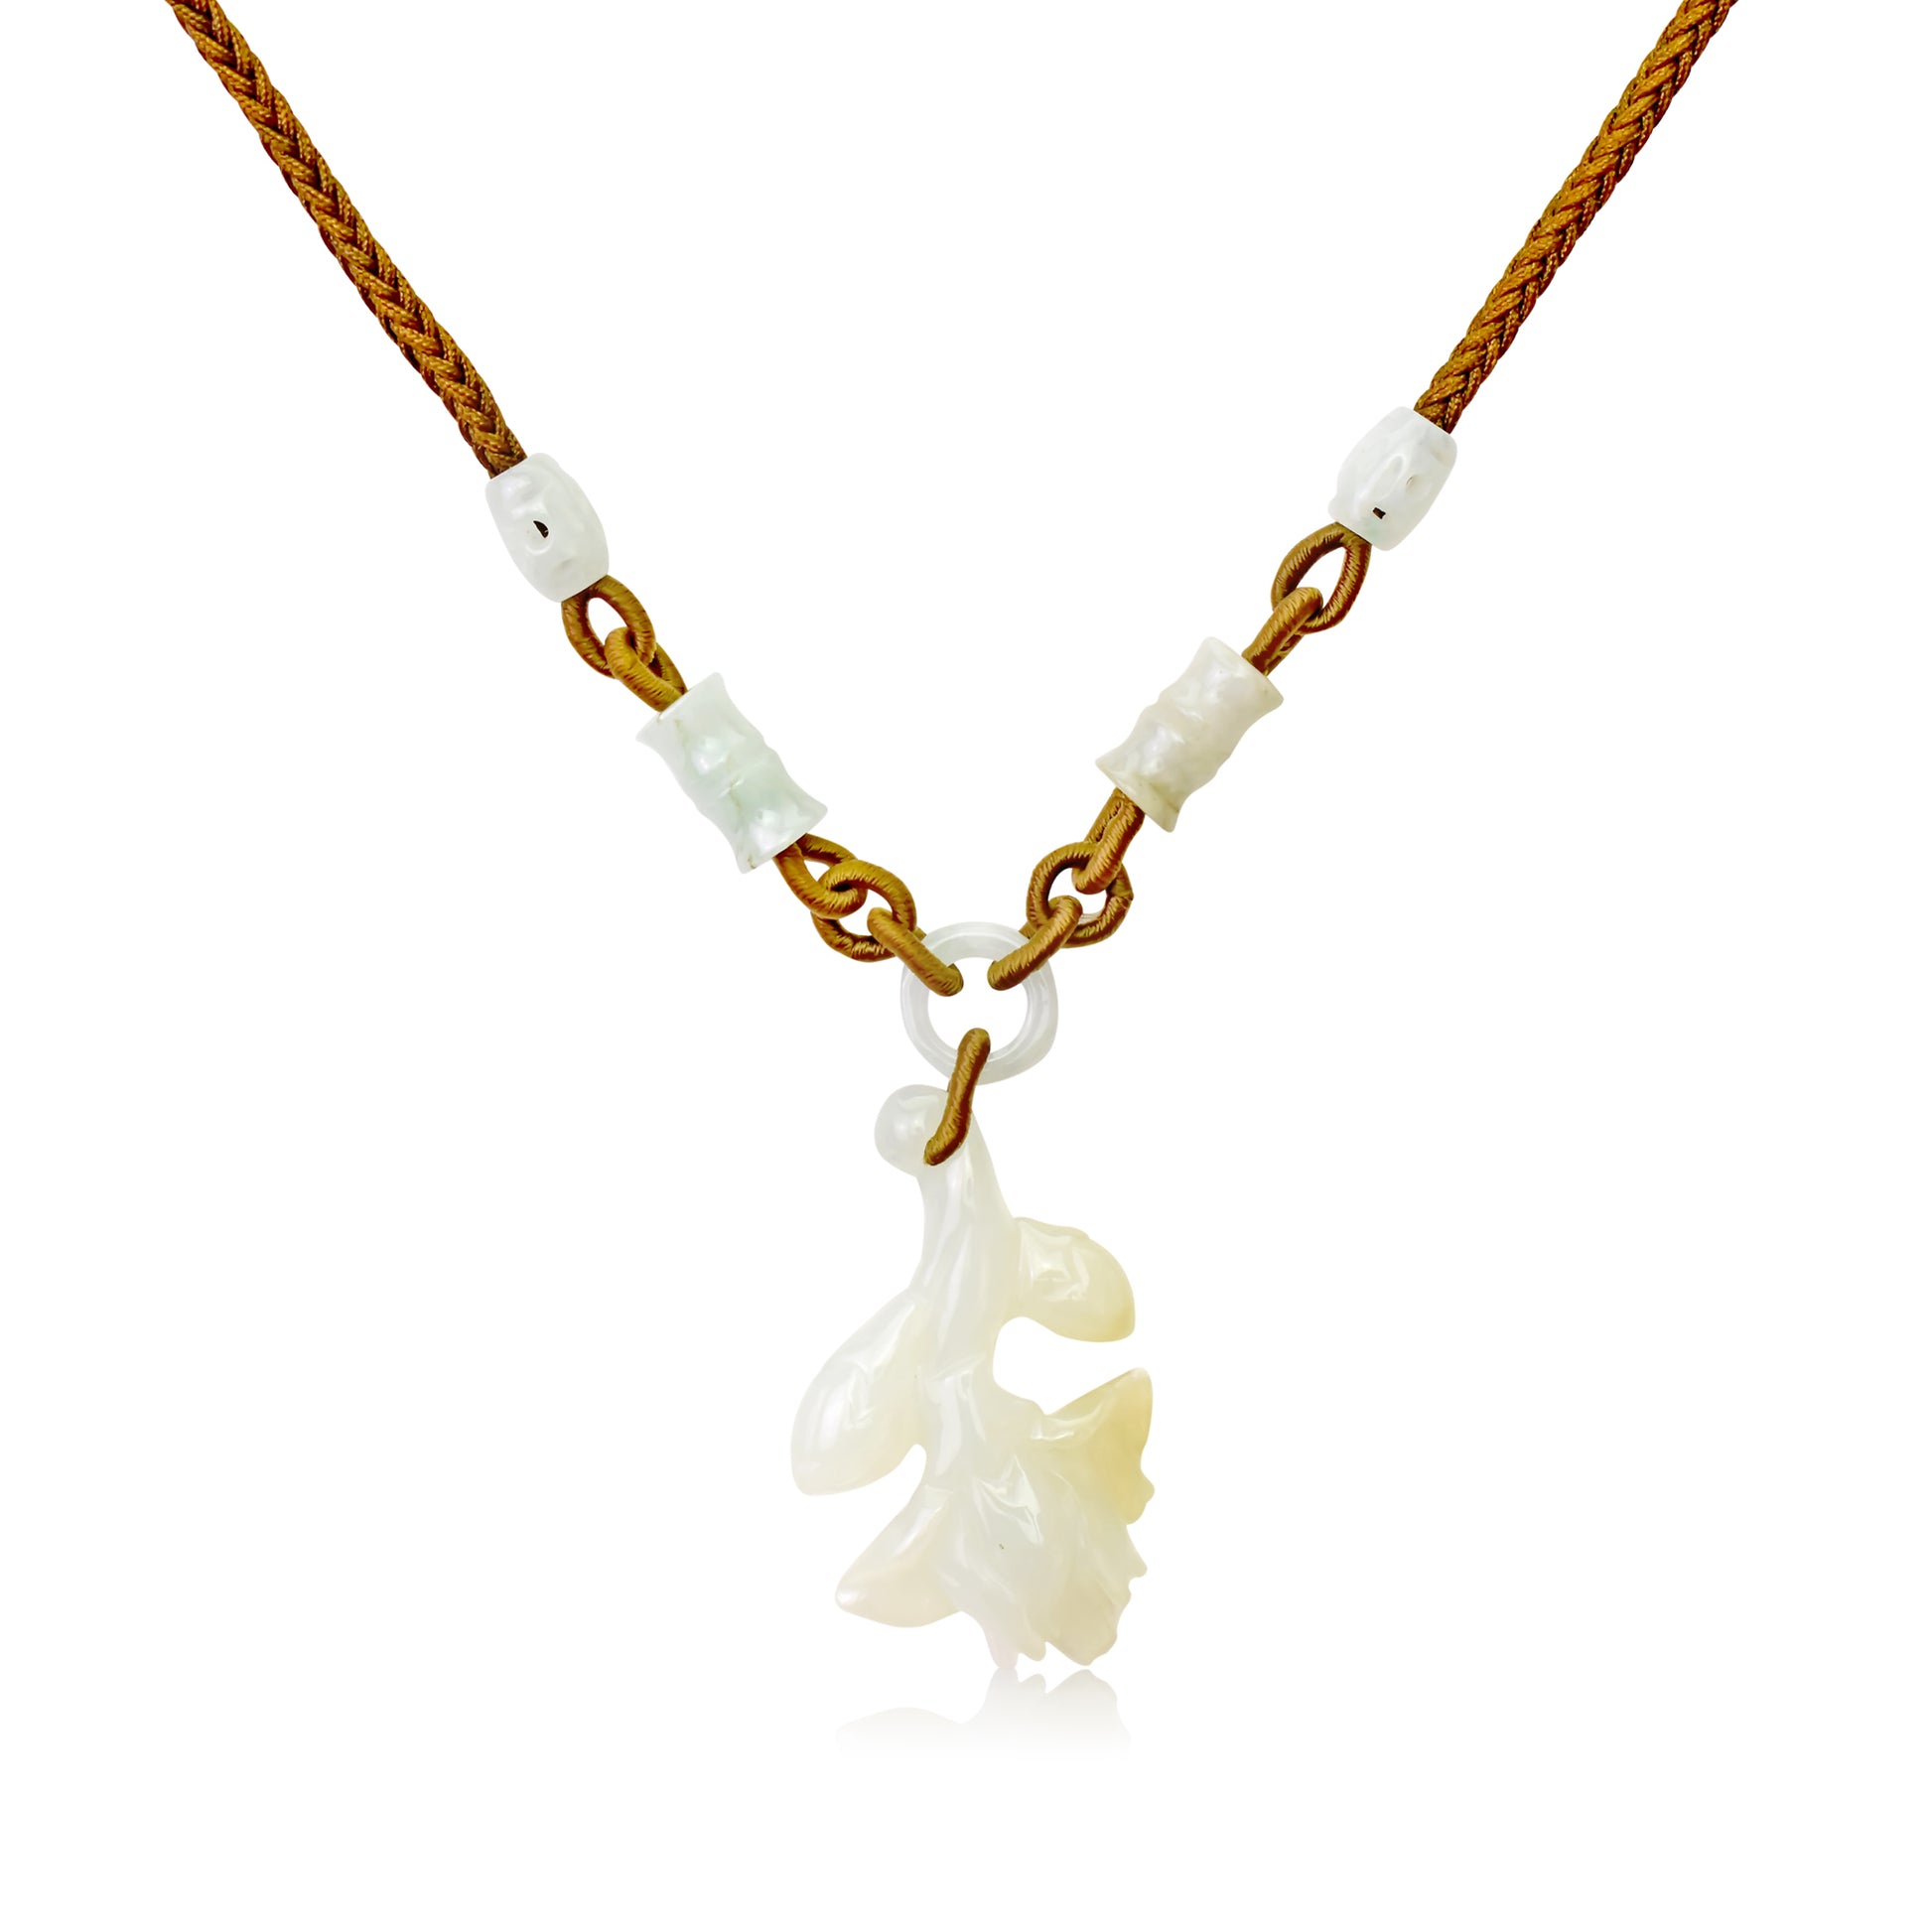 Show Your Strength and Resilience with a Protea Flower Necklace made with Brown Cord